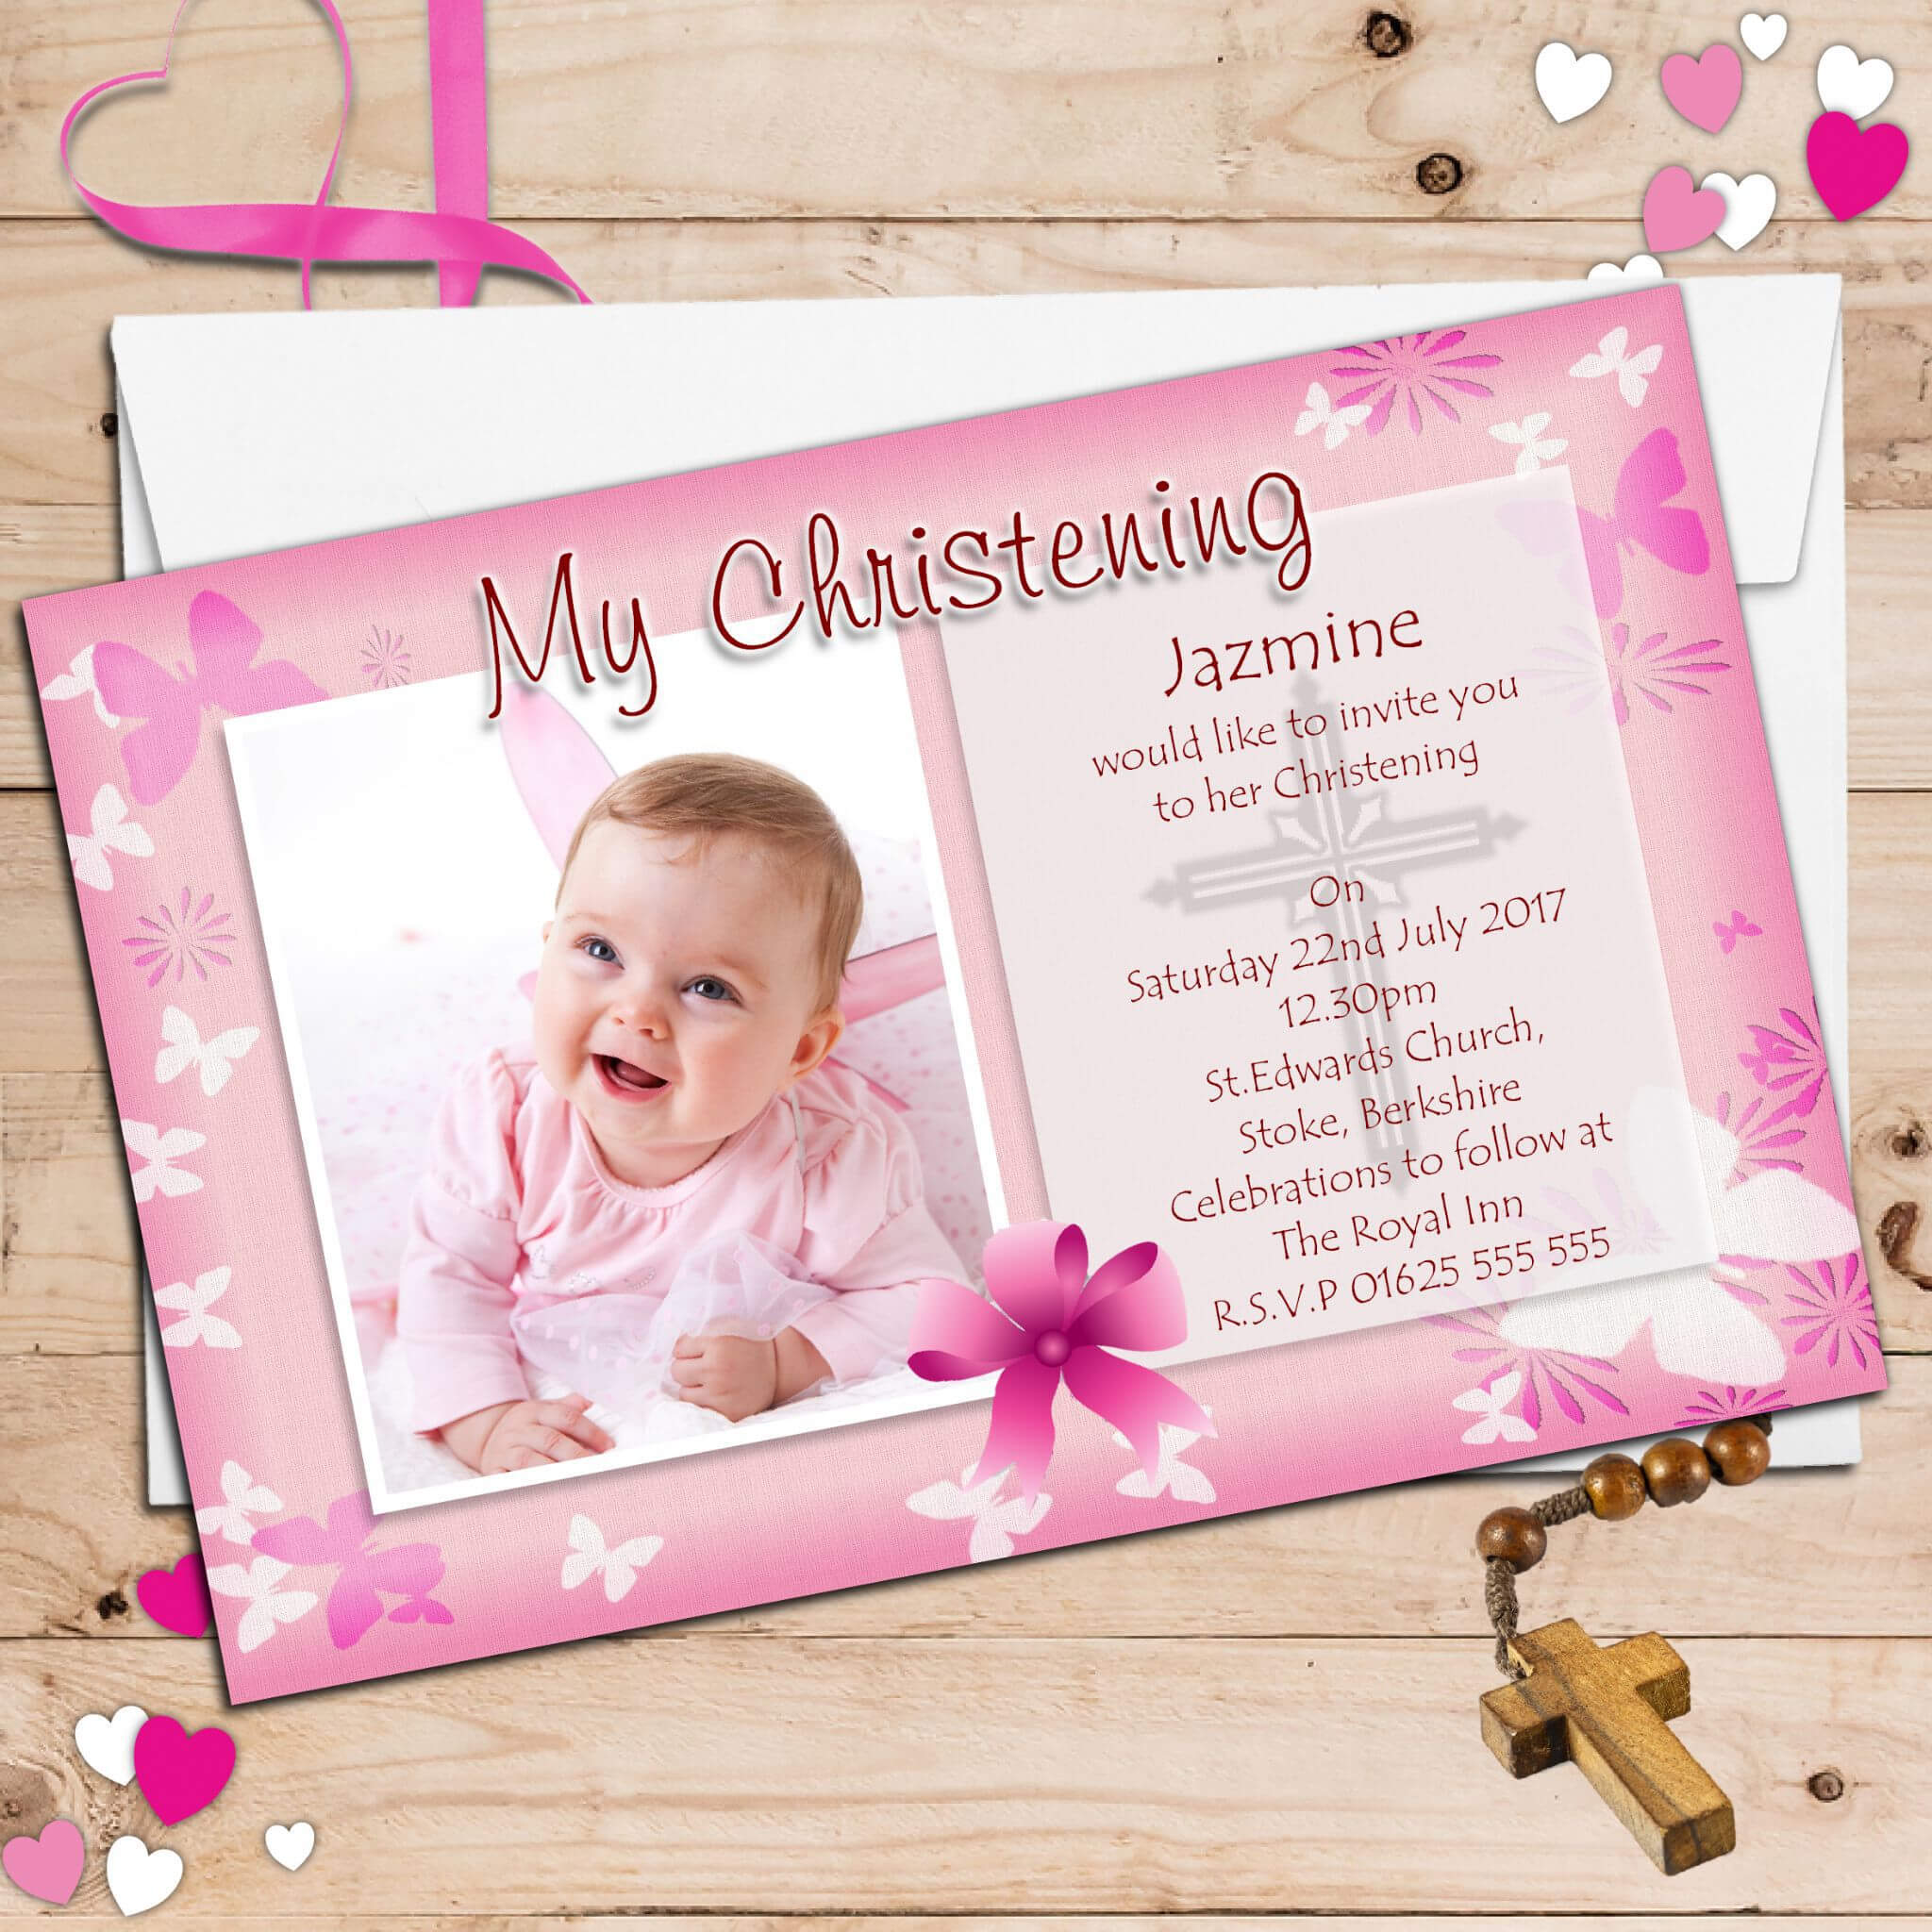 Baptism Invitation Card : Baptism Invitation Cards Within Free Christening Invitation Cards Templates